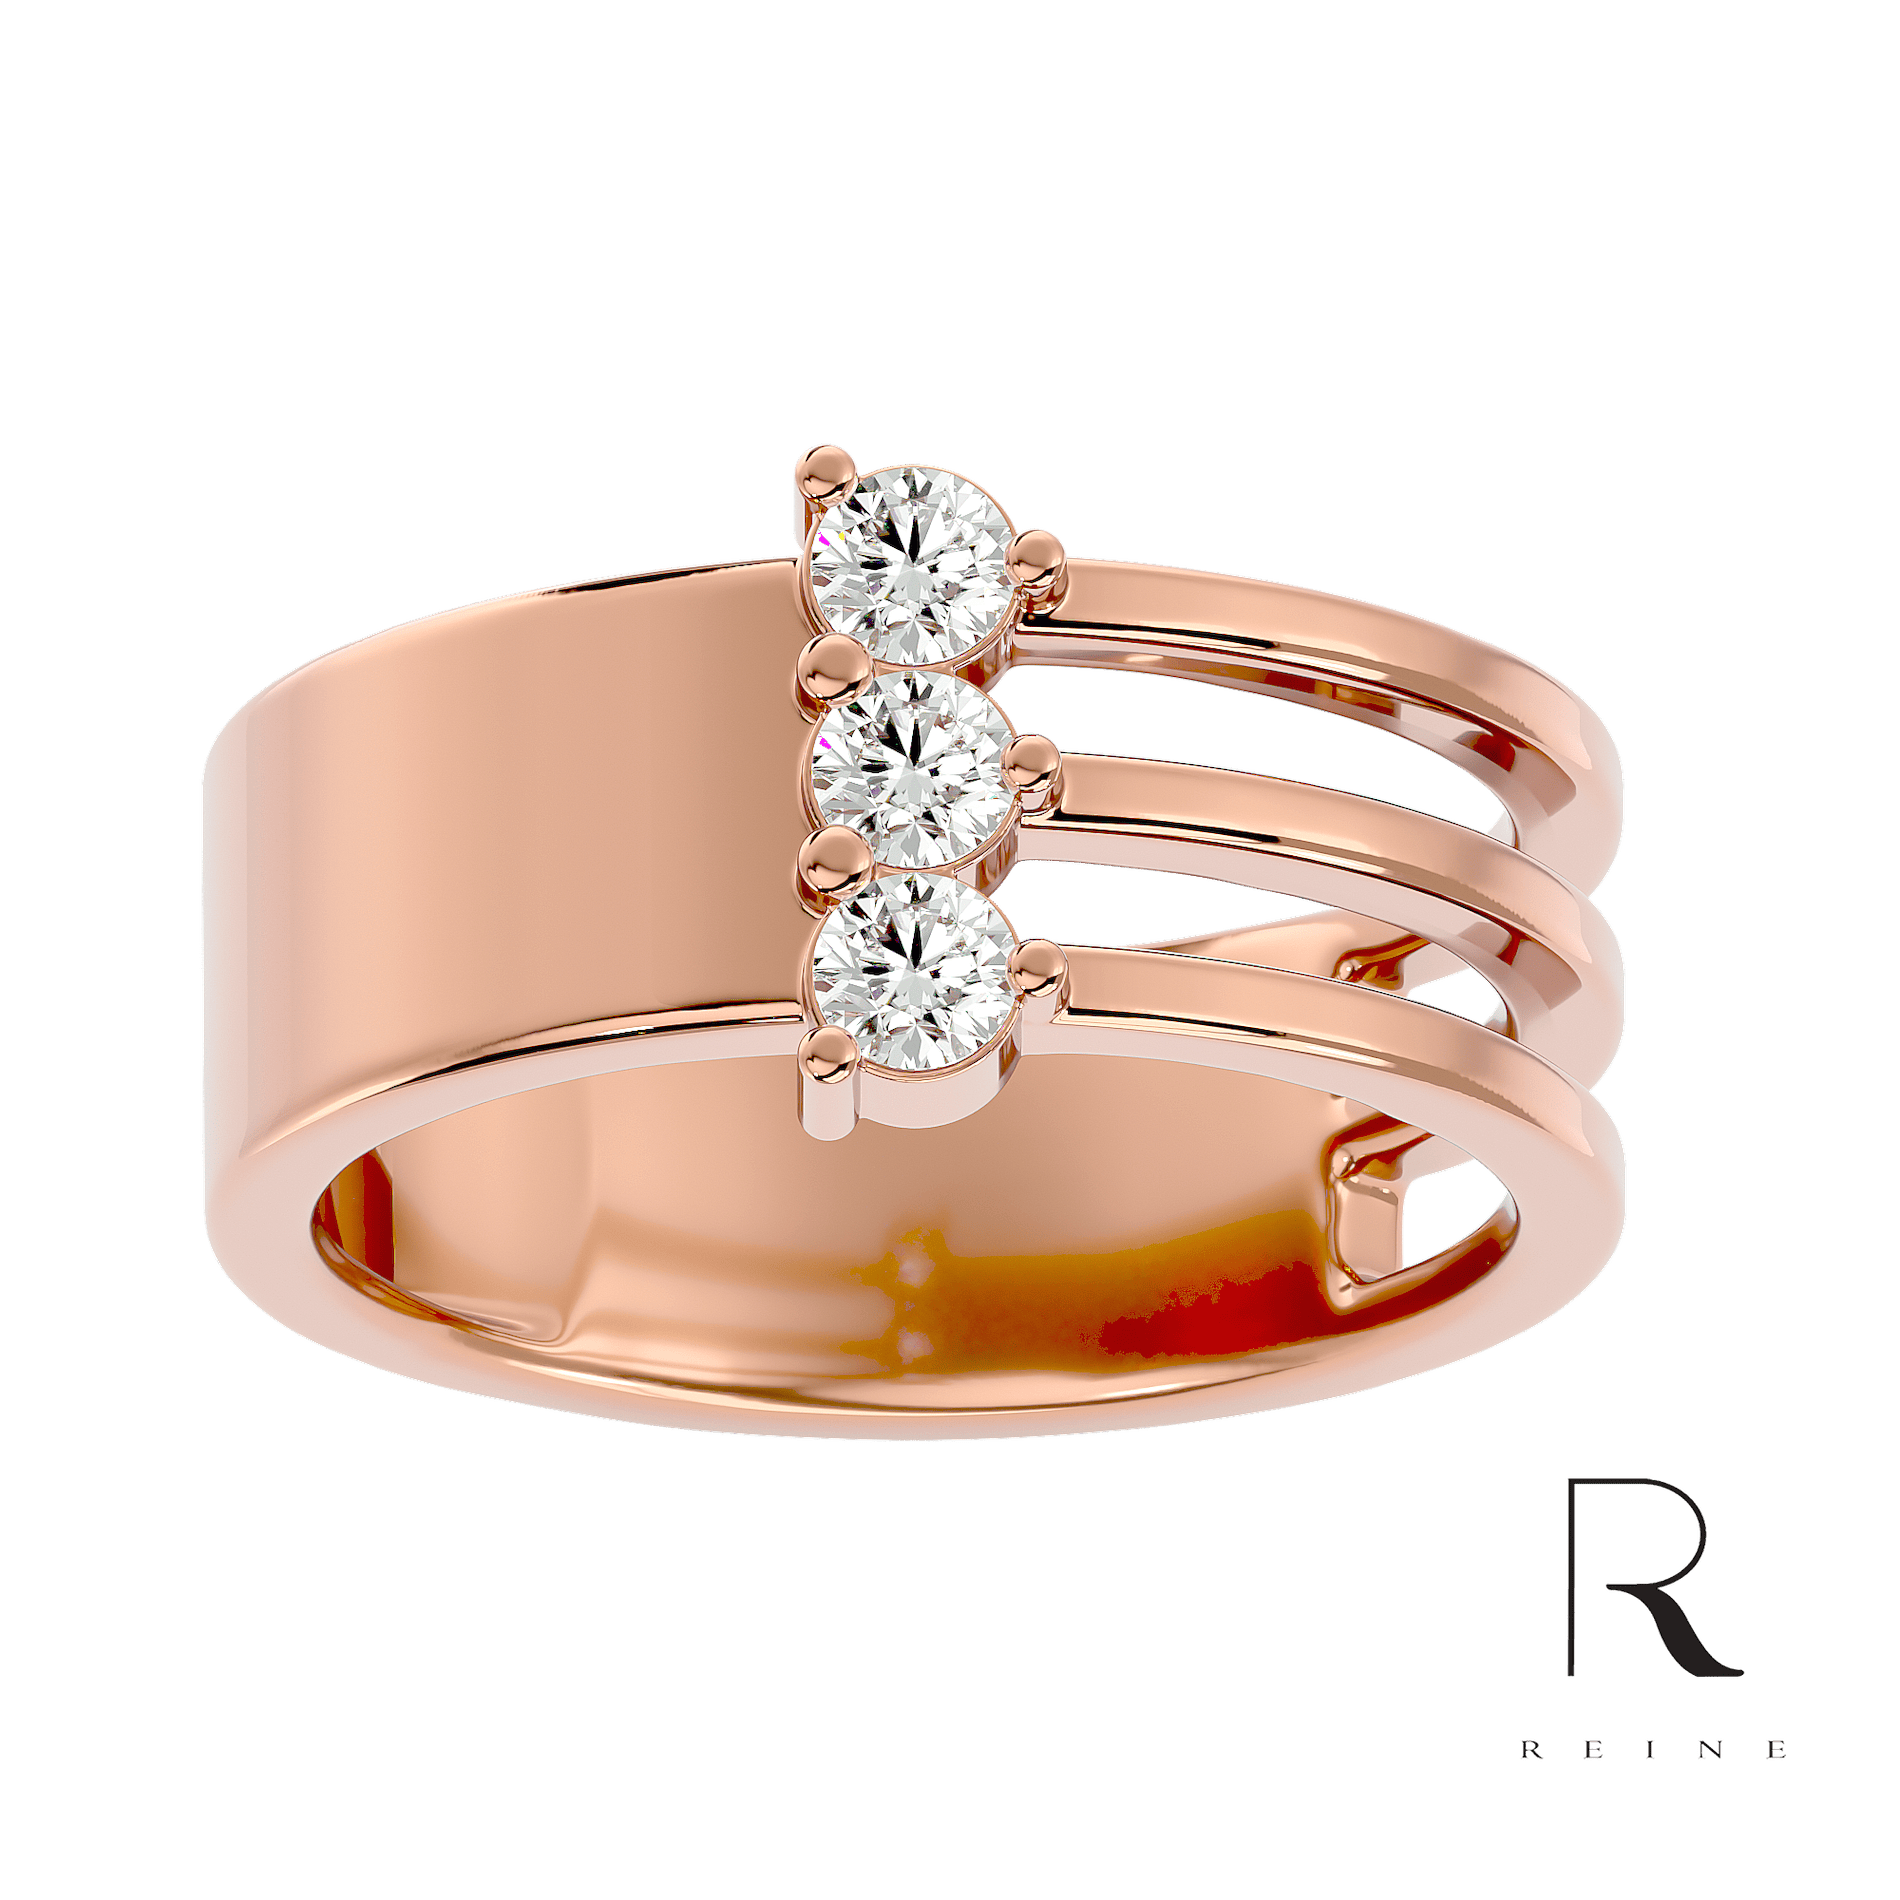 3 diamonds ring with gold